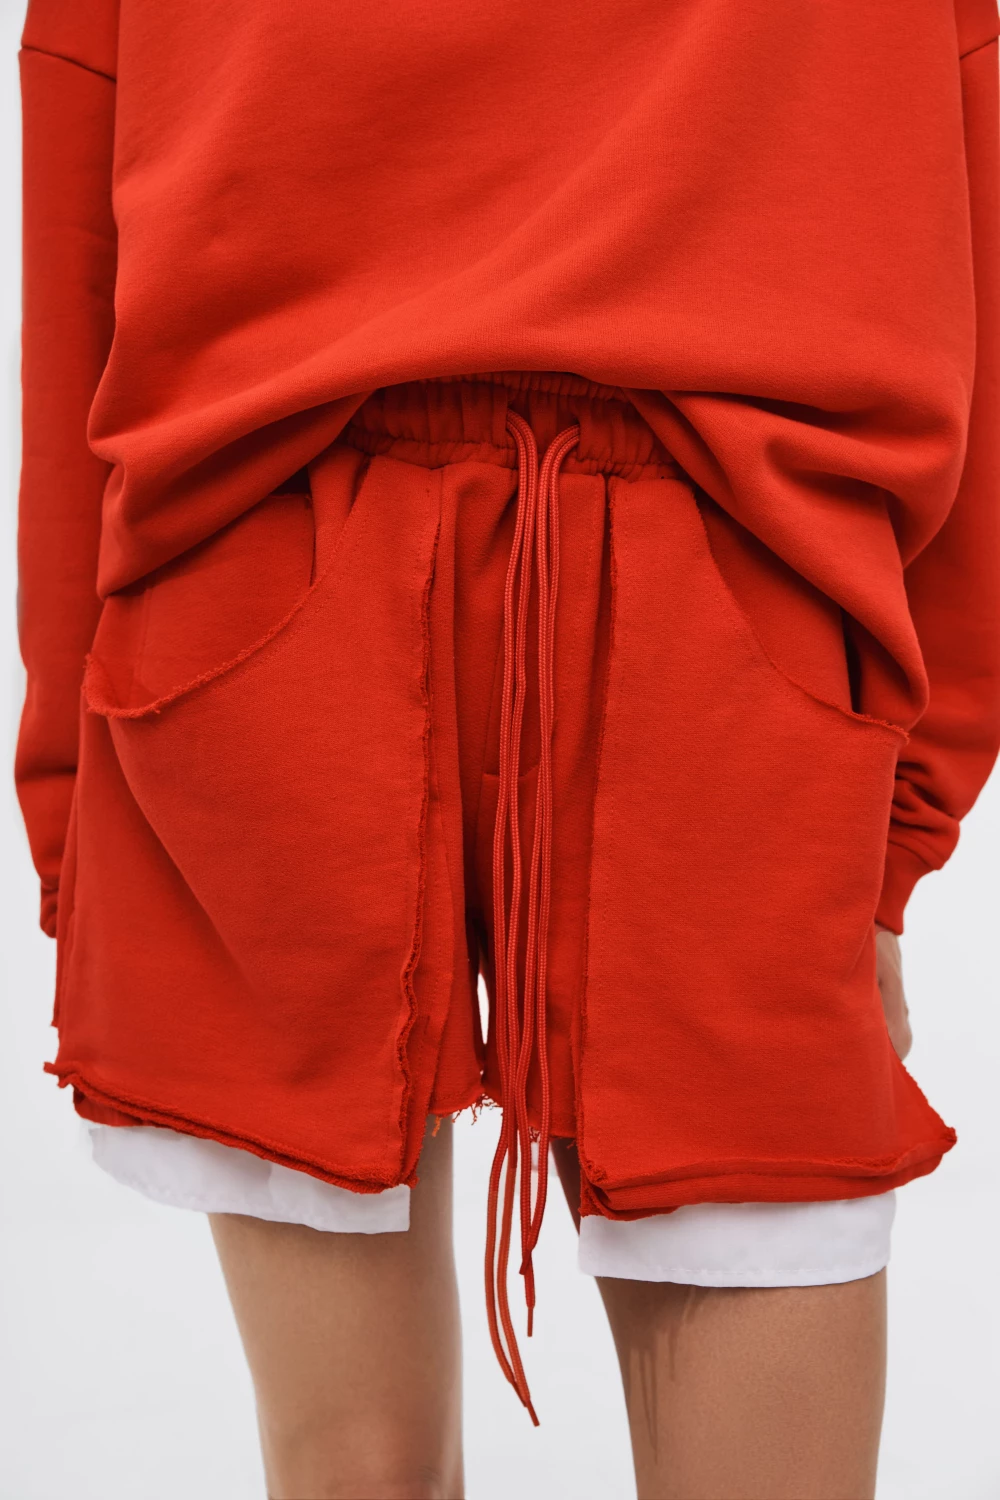 destroyed shorts in red color